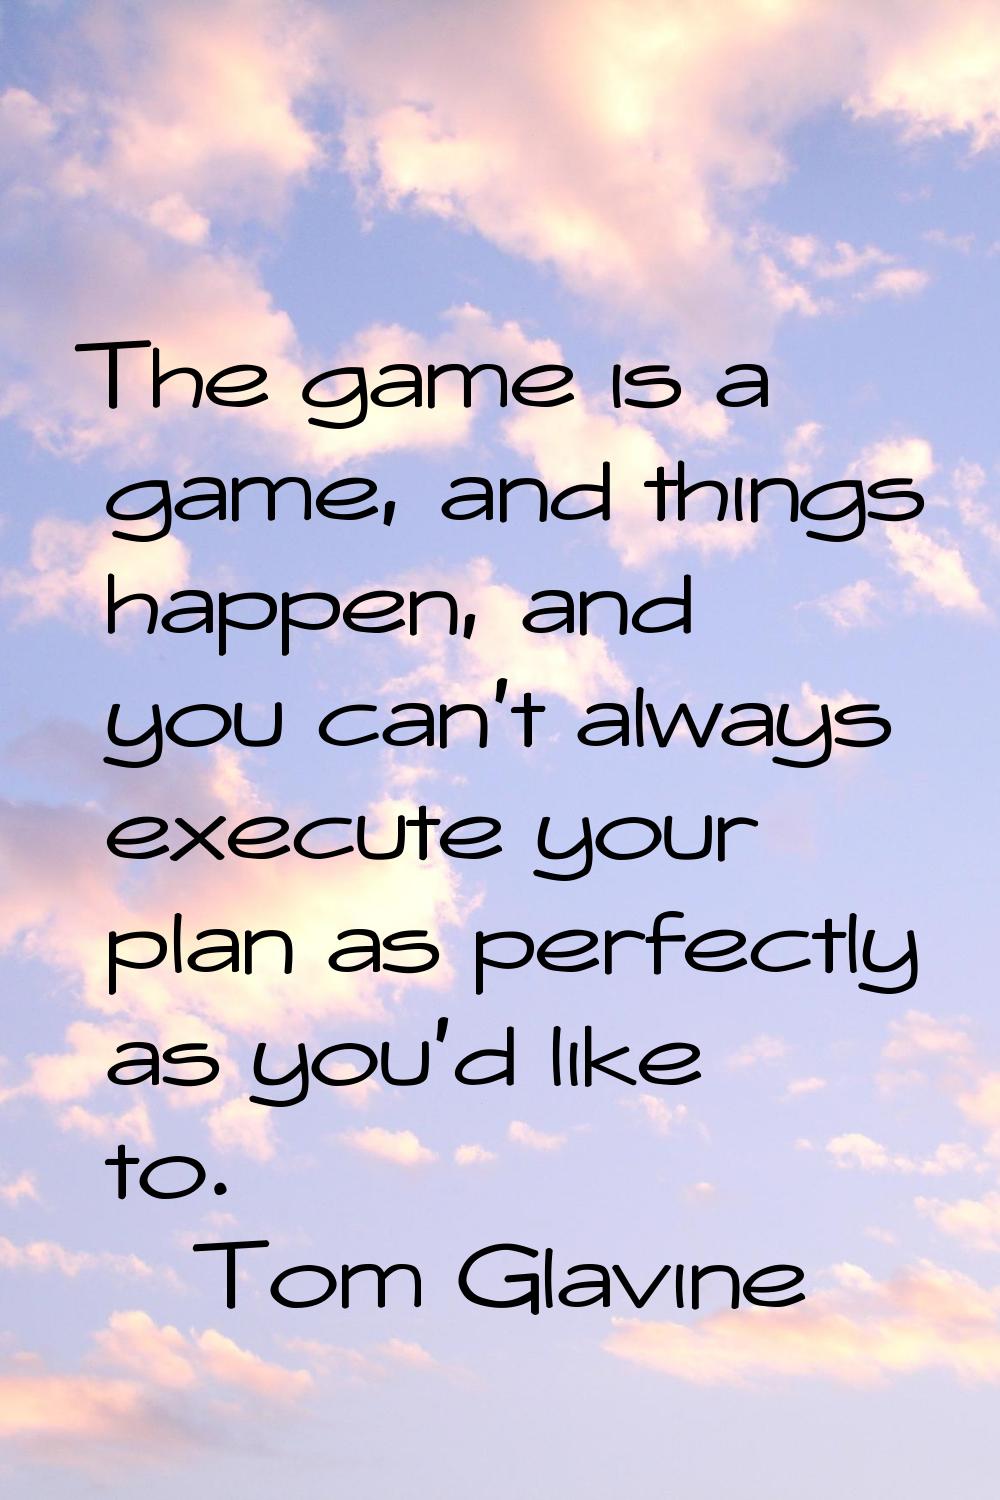 The game is a game, and things happen, and you can't always execute your plan as perfectly as you'd